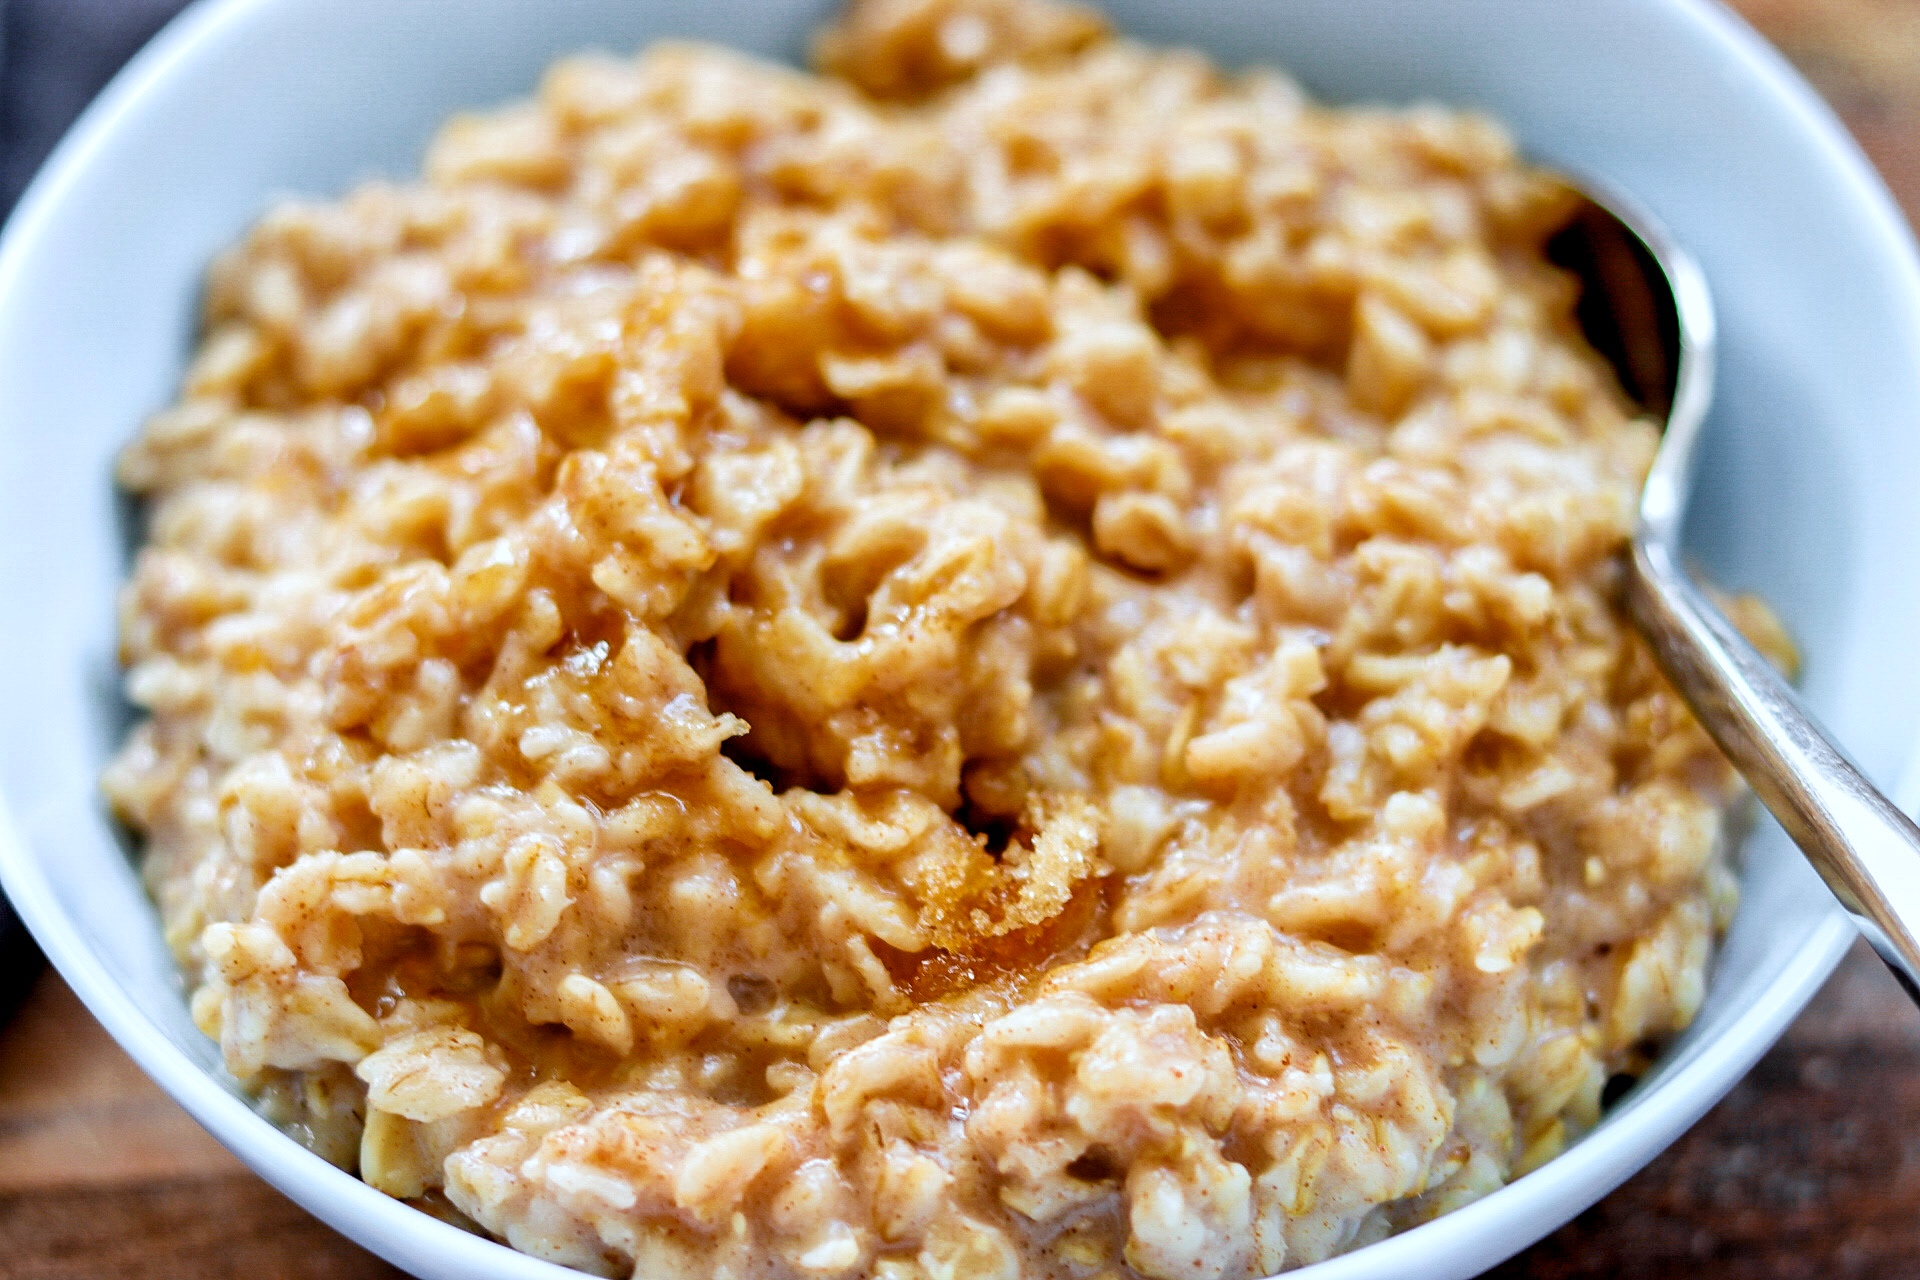 5-Ingredient Cinnamon and Brown Sugar Instant Pot Oatmeal